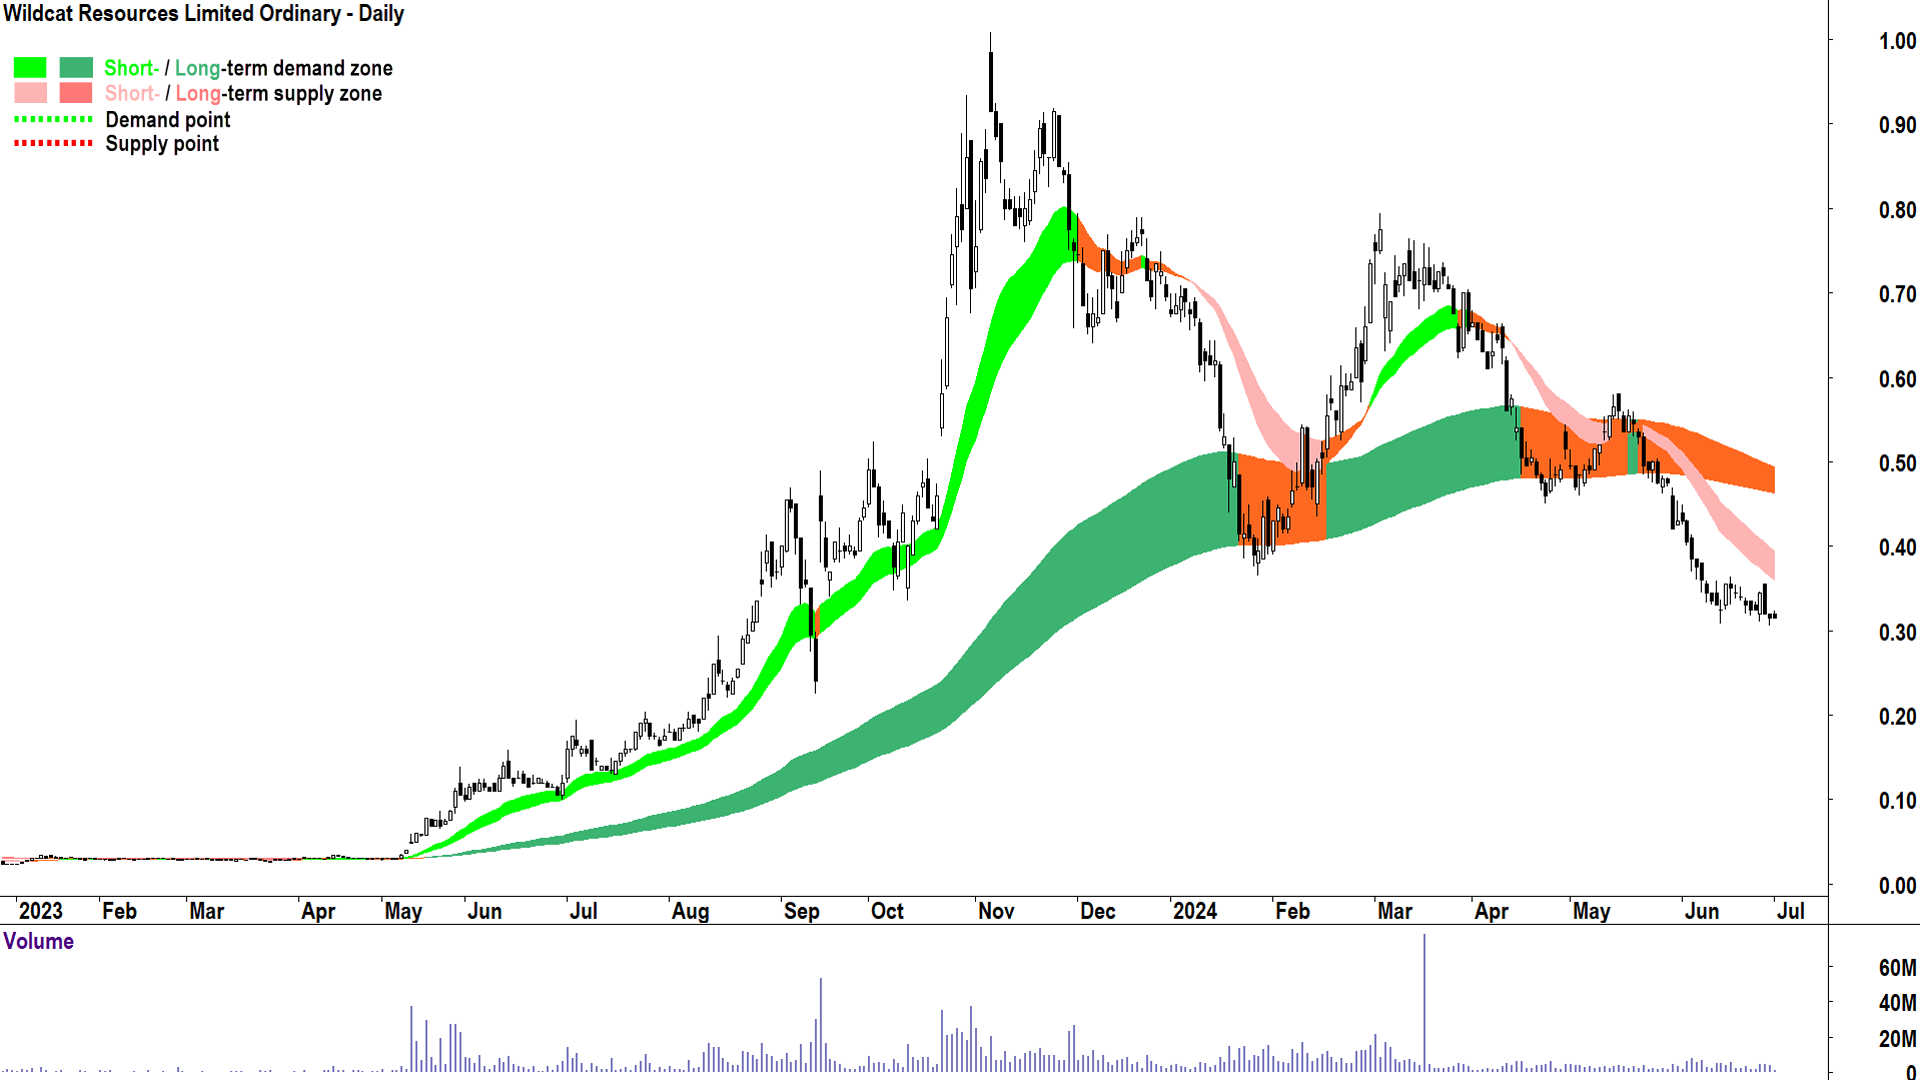 Wildcat Resources (ASX-WC8) chart 1 July 2024